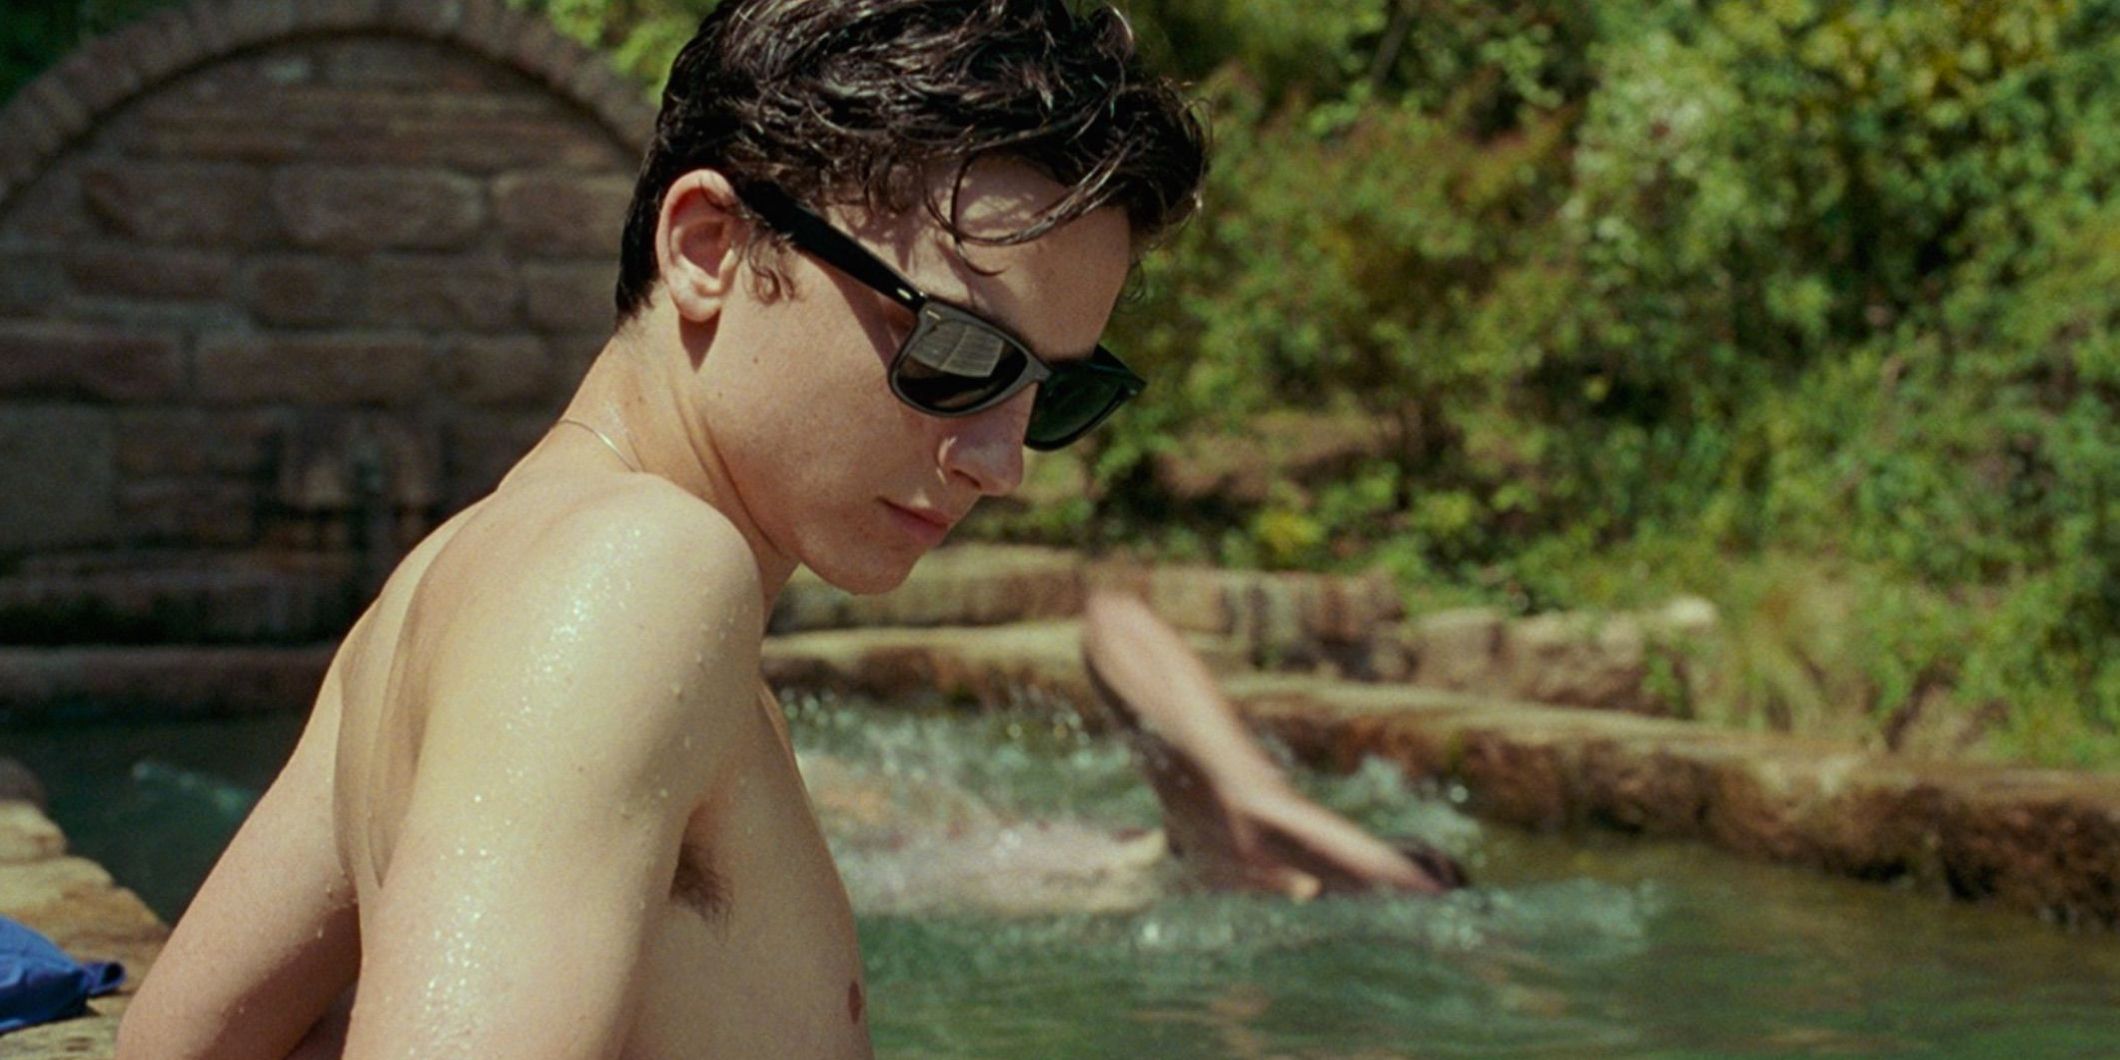 Elio lounges in the pool with sunglasses in Call Me By Your Name.